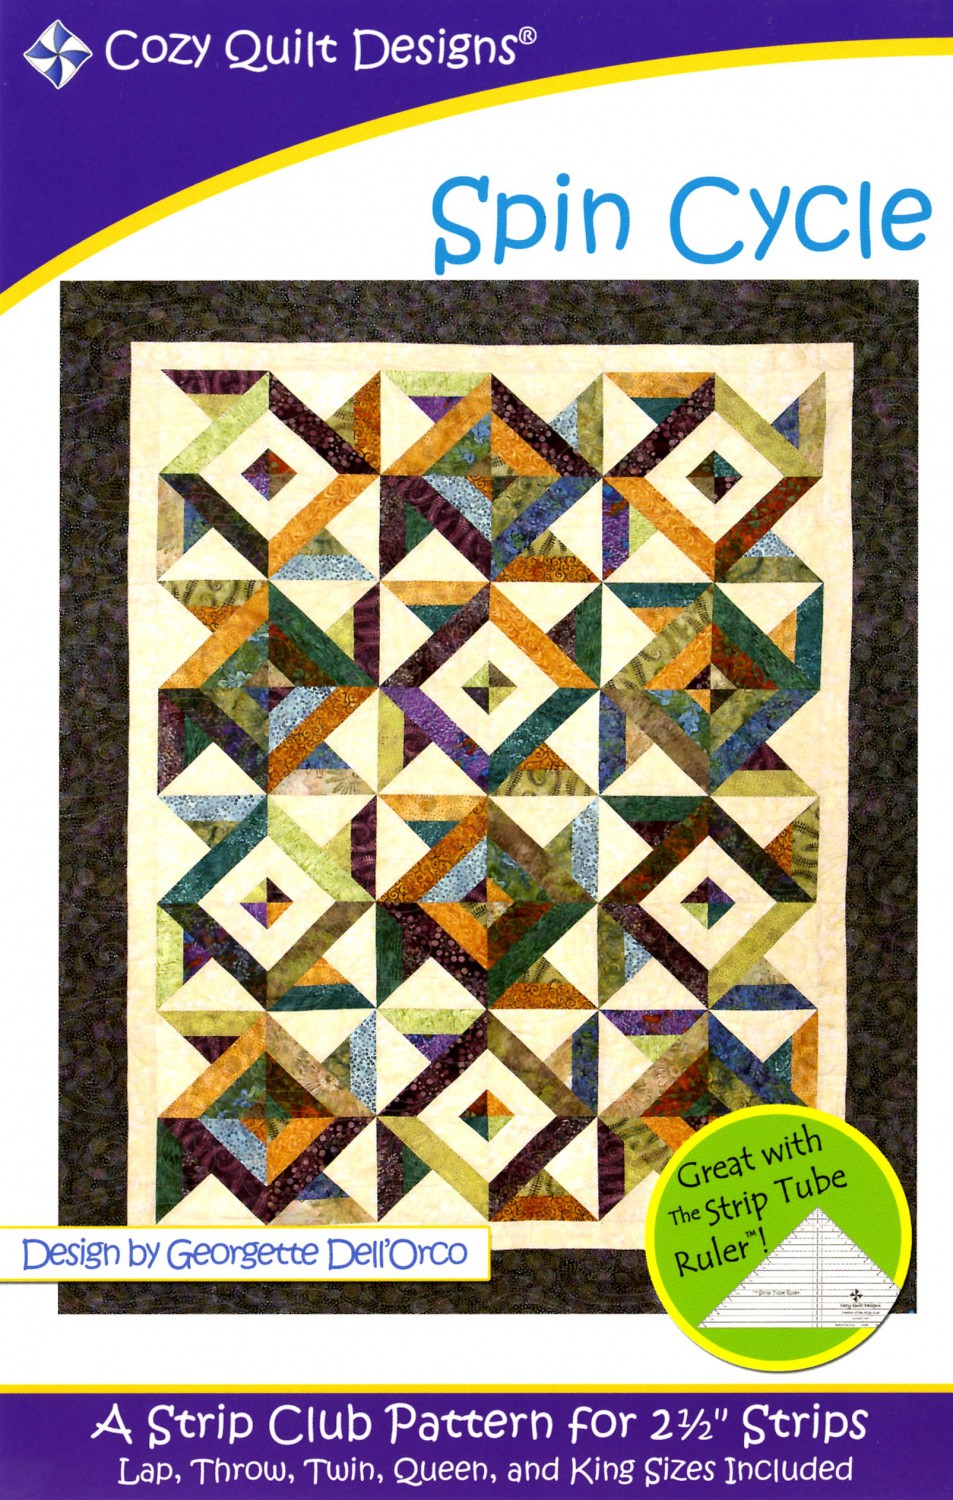 Cozy Quilt Designs Spin Cycle Quilt Pattern